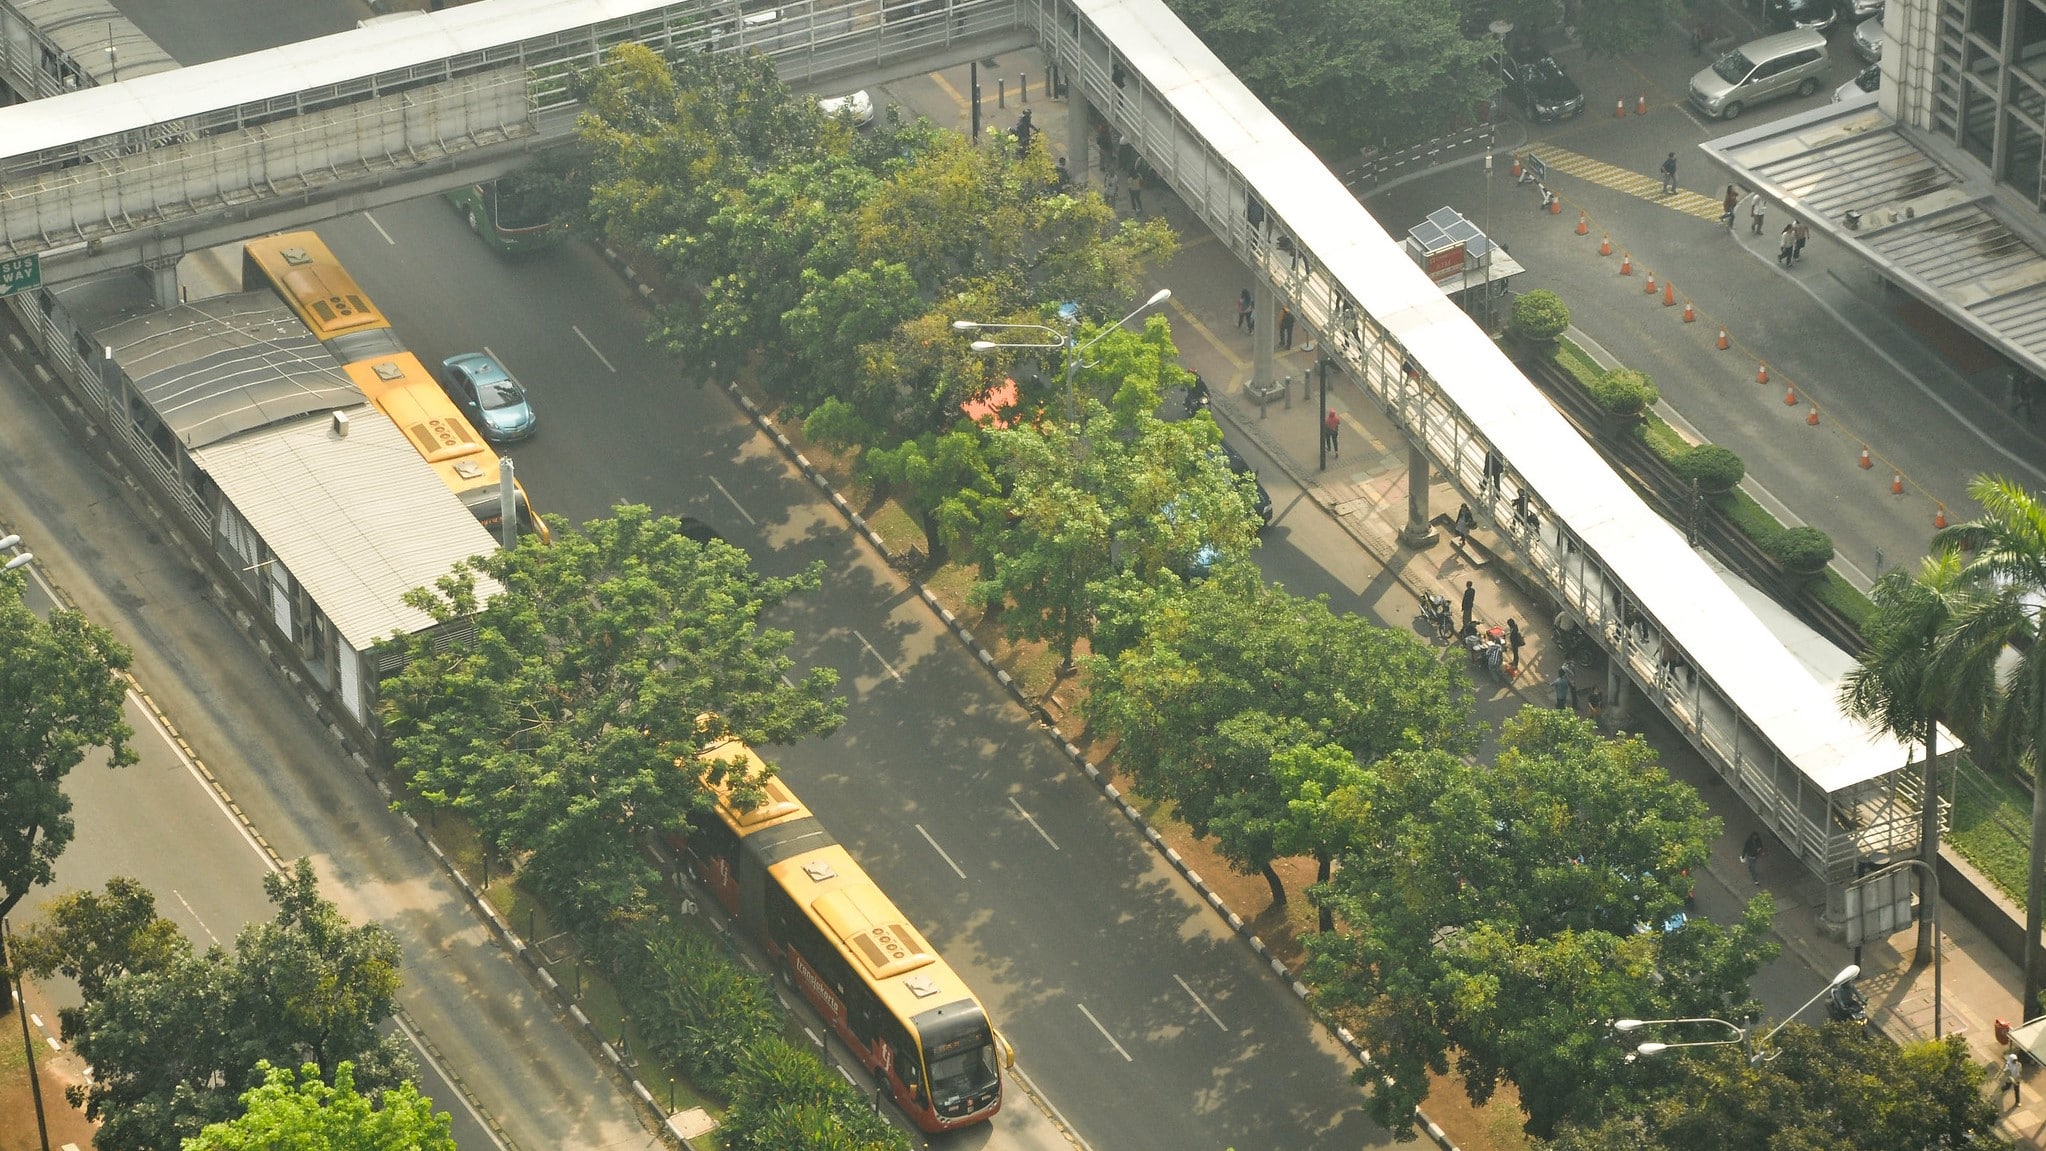 An aerial view of a bus depot lined with trees.